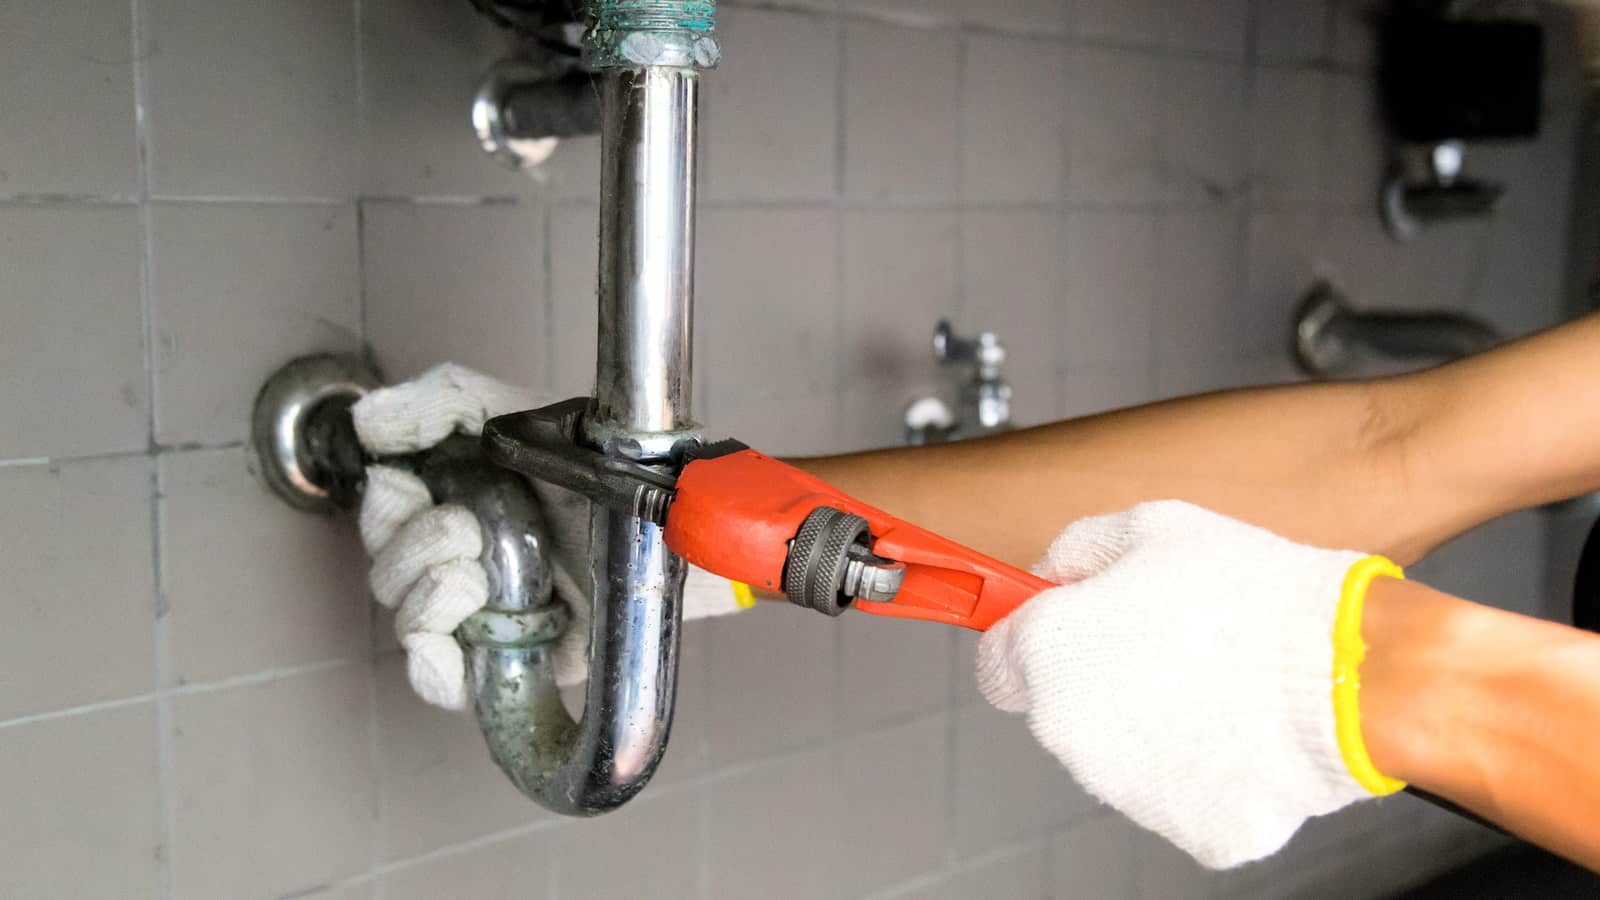 Roto Rooter Plumbing And Water Cleanup of Evanston